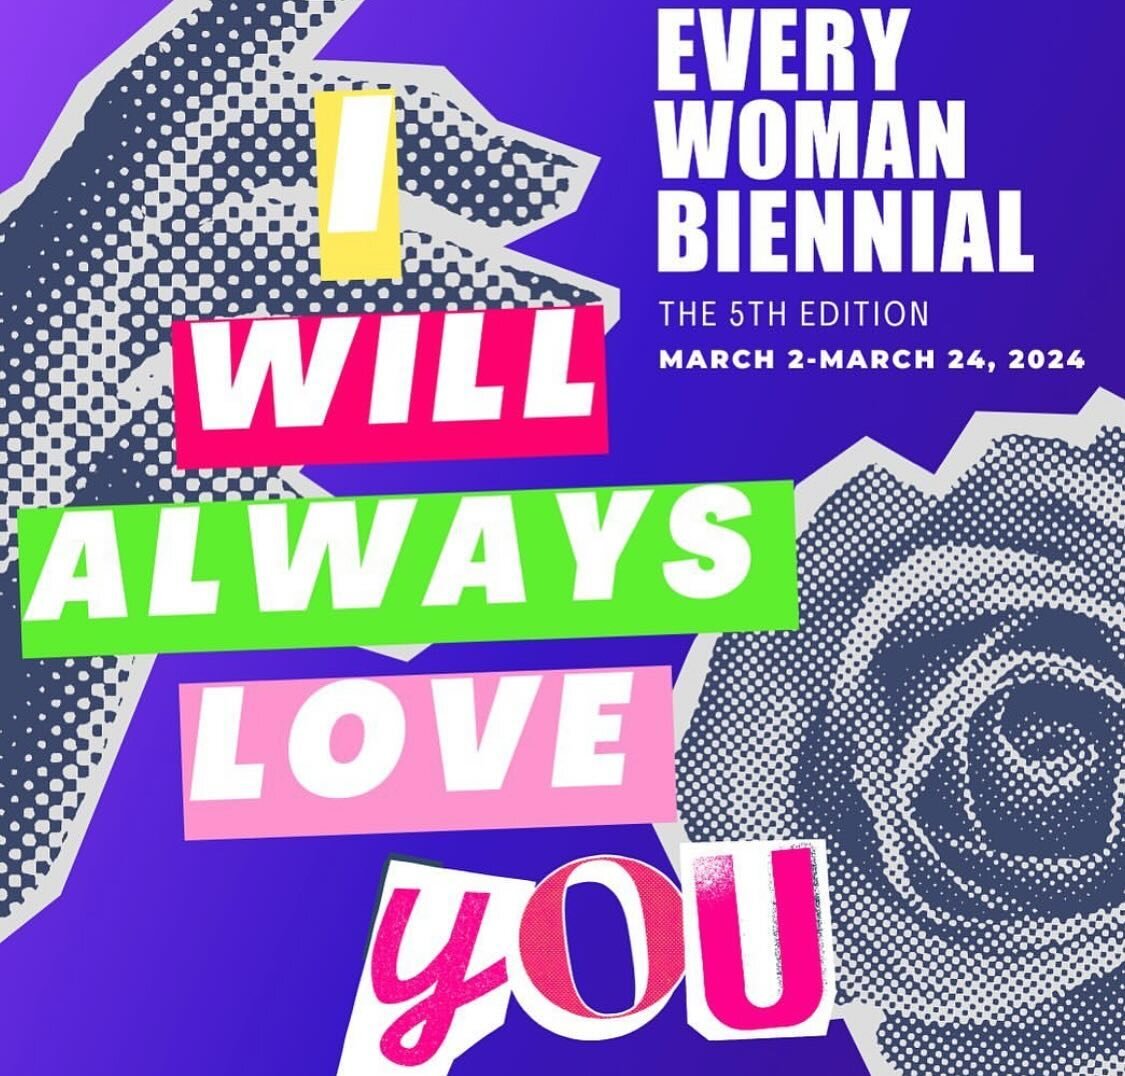 I&rsquo;m thrilled to be part of the 2024 EWB edition 𝗜 𝗪𝗶𝗹𝗹 𝗔𝗹𝘄𝗮𝘆𝘀 𝗟𝗼𝘃𝗲 𝗬𝗼𝘂  @everywomanbiennial at @lamamagalleria opening on Saturday, March 2nd. ⁣
⁣
#everywomanbiennial ⁣
#womensherstorymonth ⁣
#womenartists